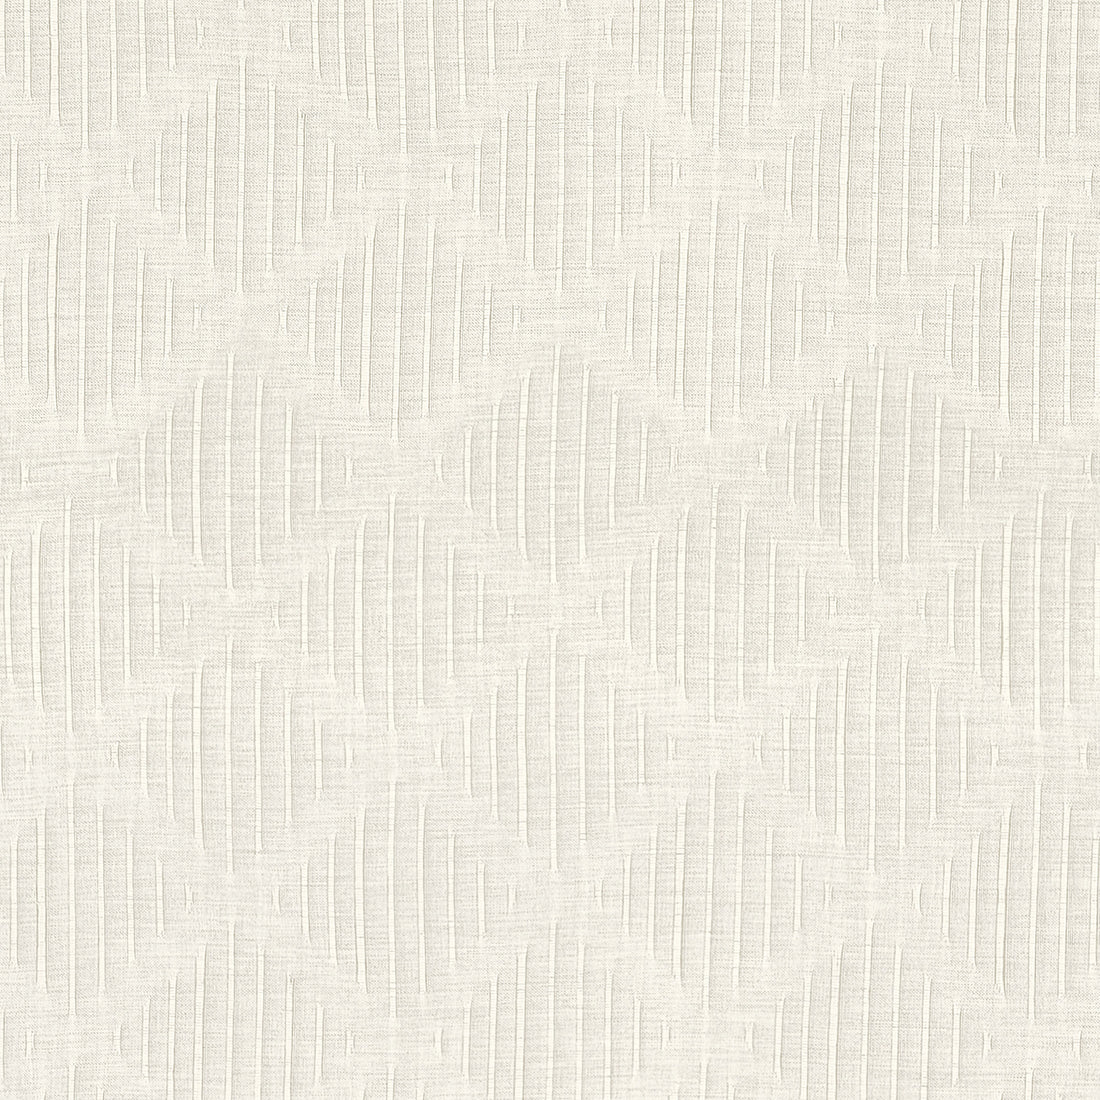 Dunlin fabric in platinum color - pattern number FWW81772 - by Thibaut in the Locale Wide Width collection